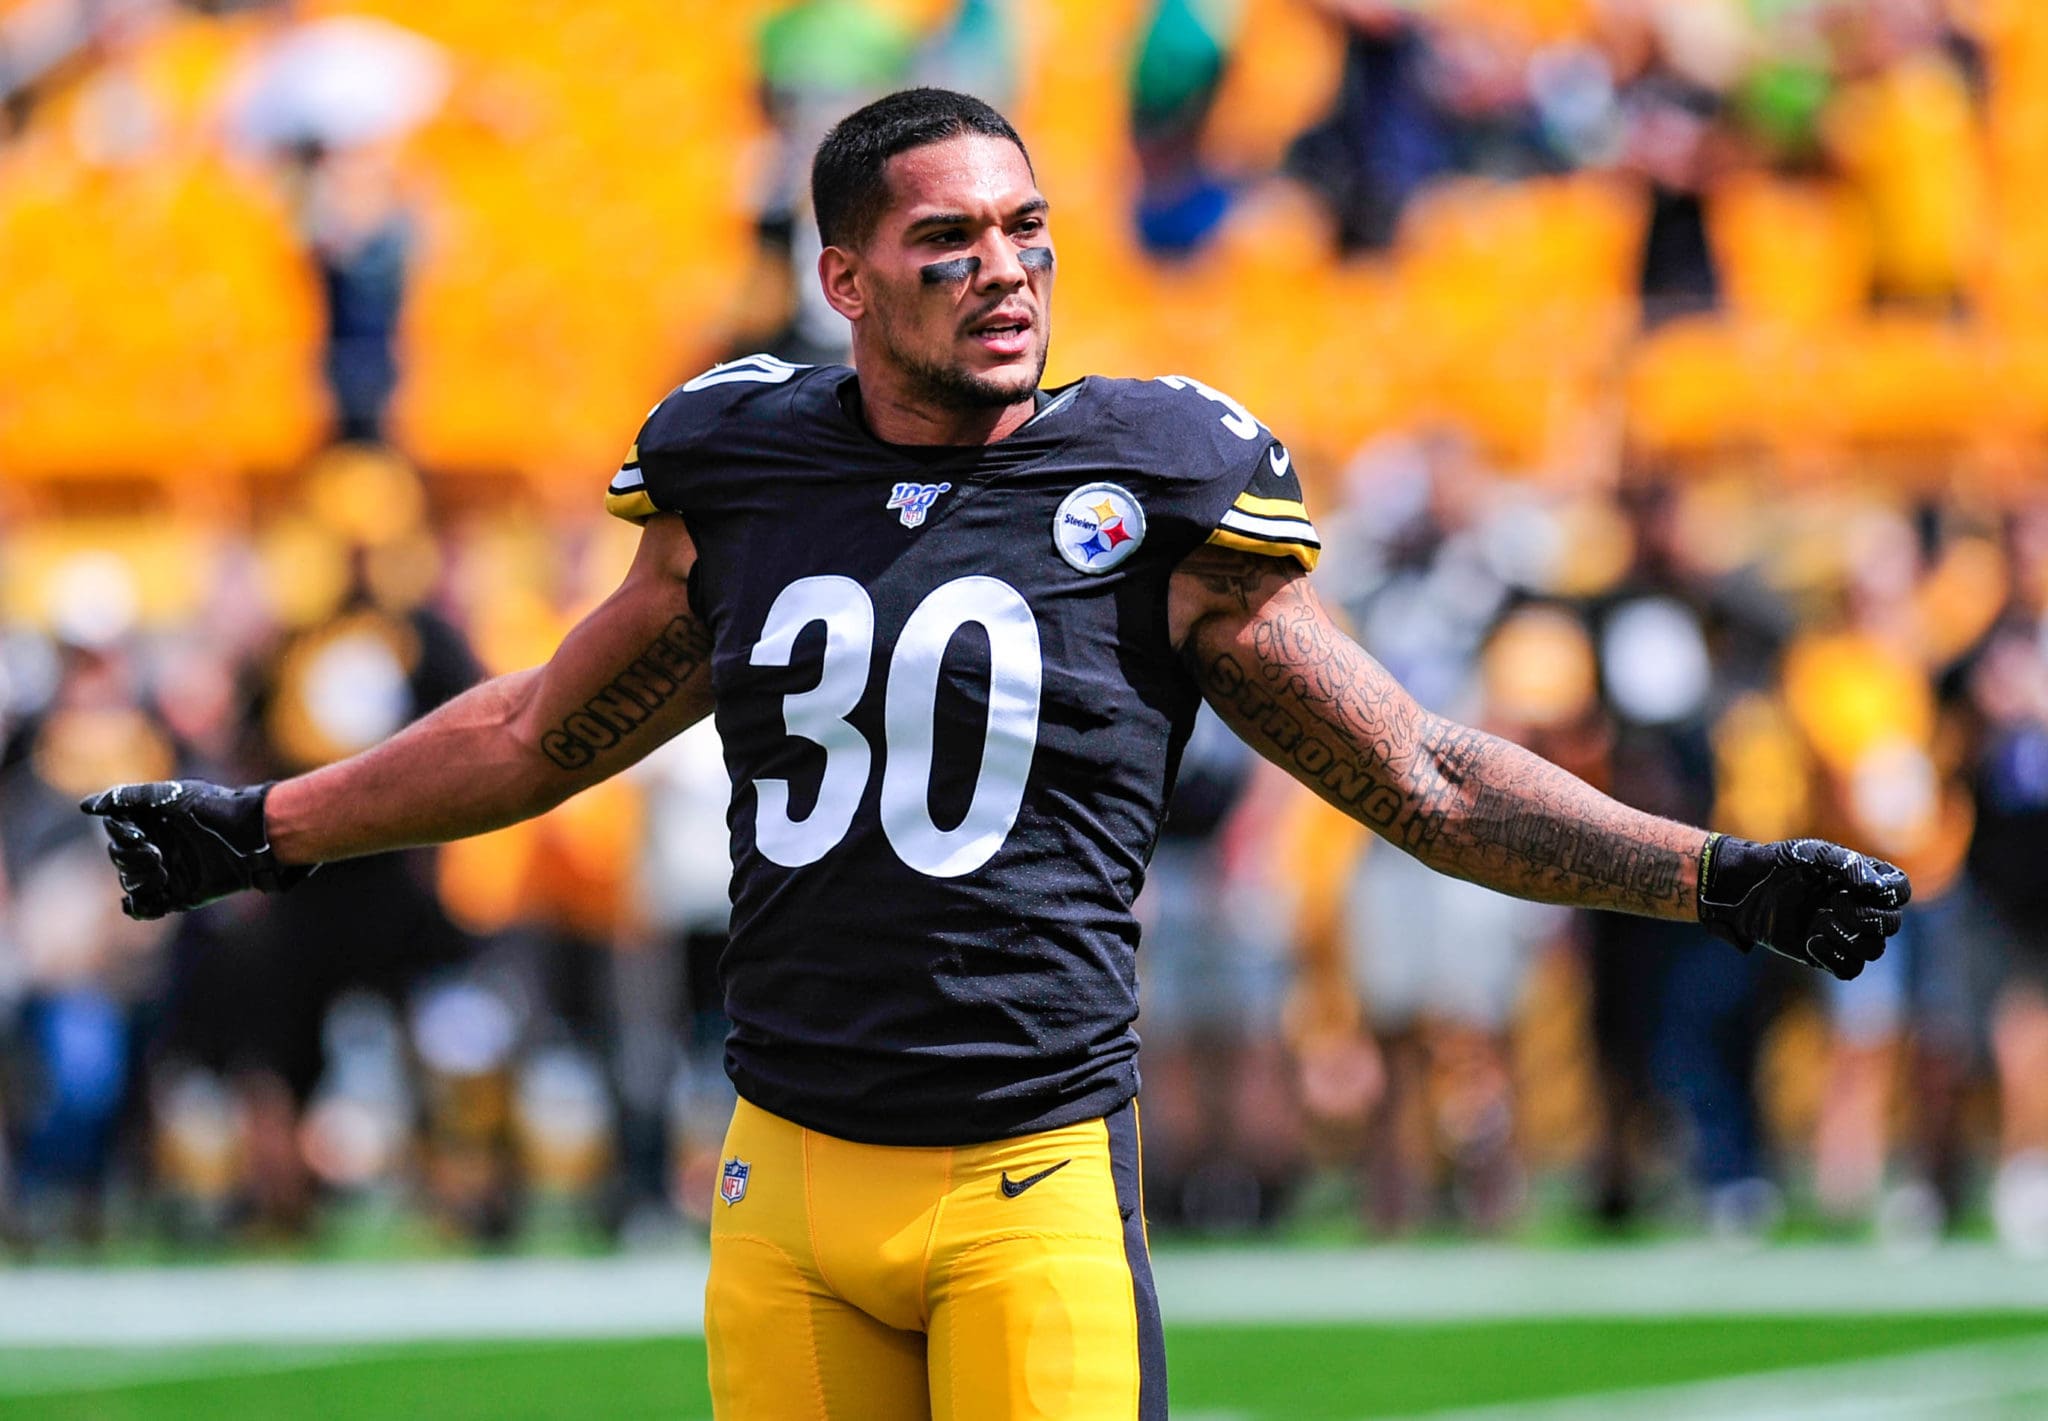 Report: Free Agent Steelers RB James Conner Visiting Arizona